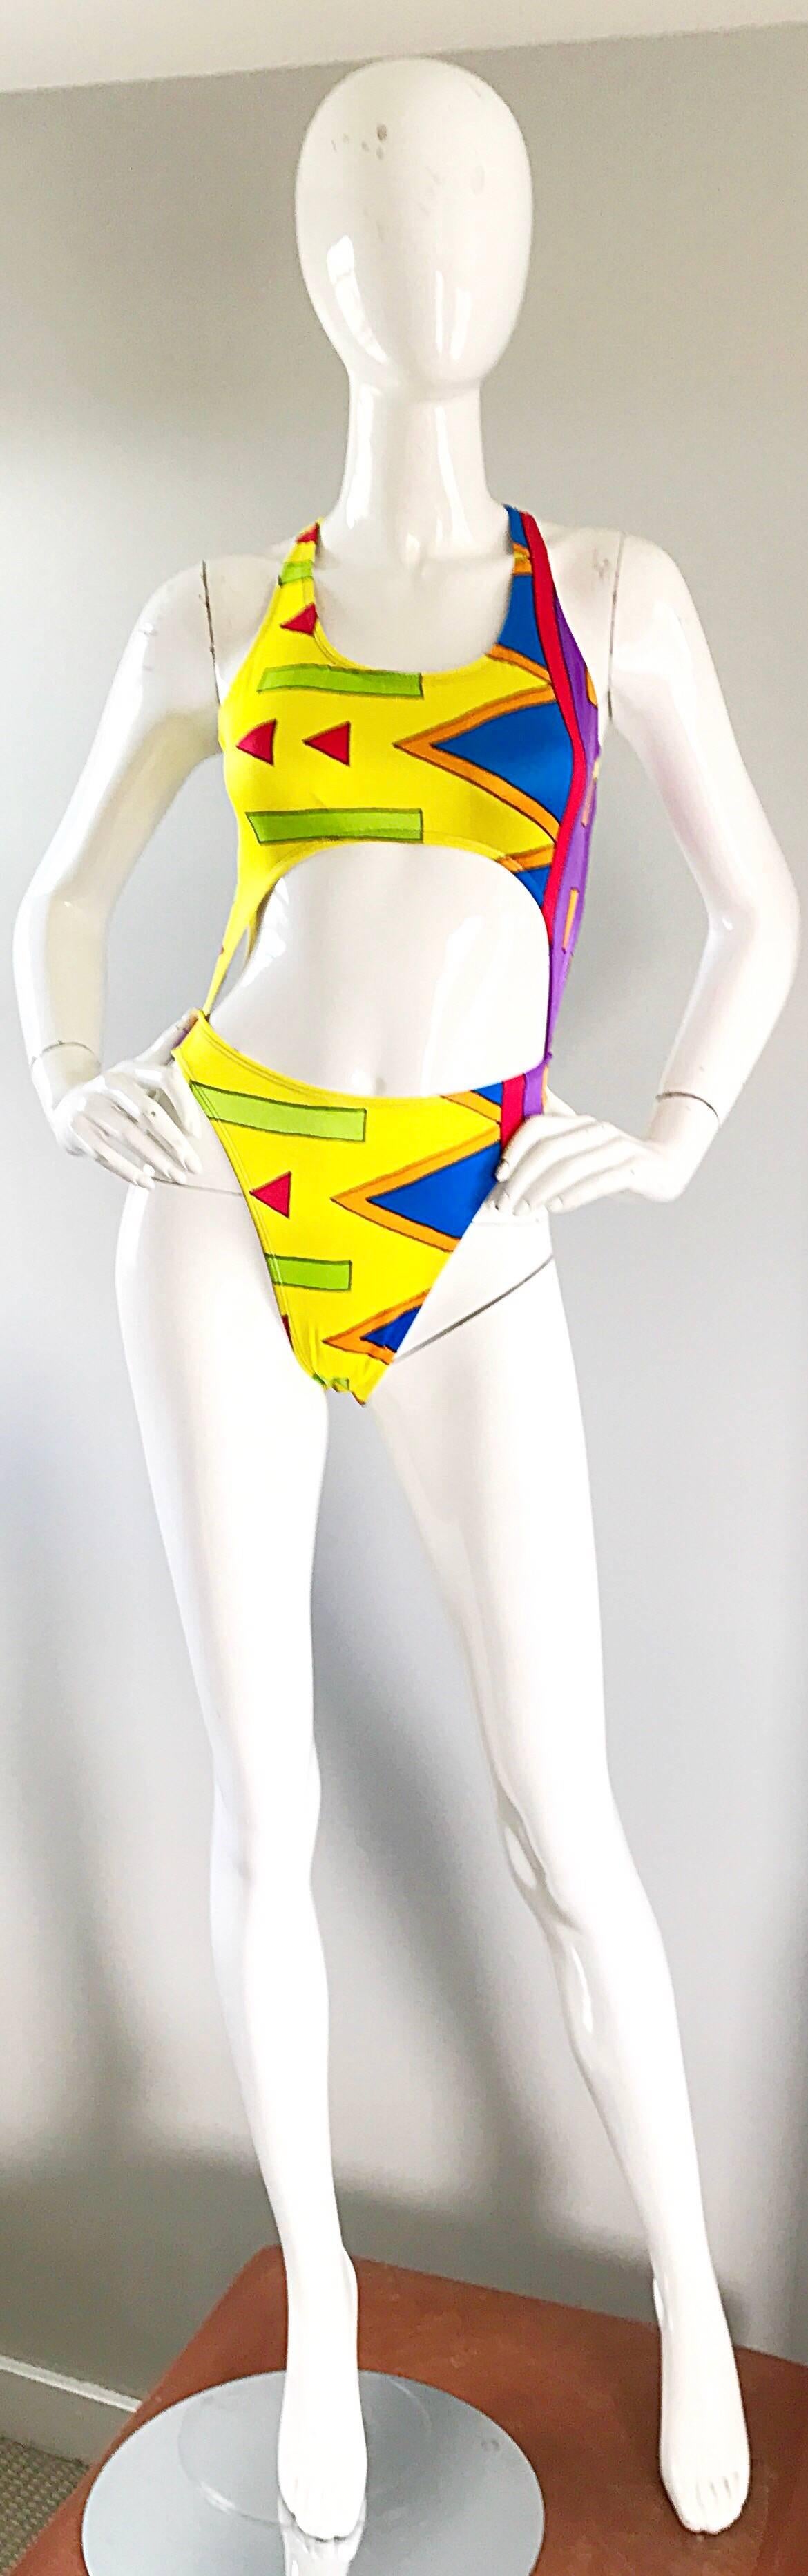 Sexy brightly colored early 90s cut-out one piece swimsuit or bodysuit! Features geometric shapes in royal blue, purple, red, orange and neon green throughout, on a bright yellow background. Straps criss-cross in the back. Cut-out detail at the